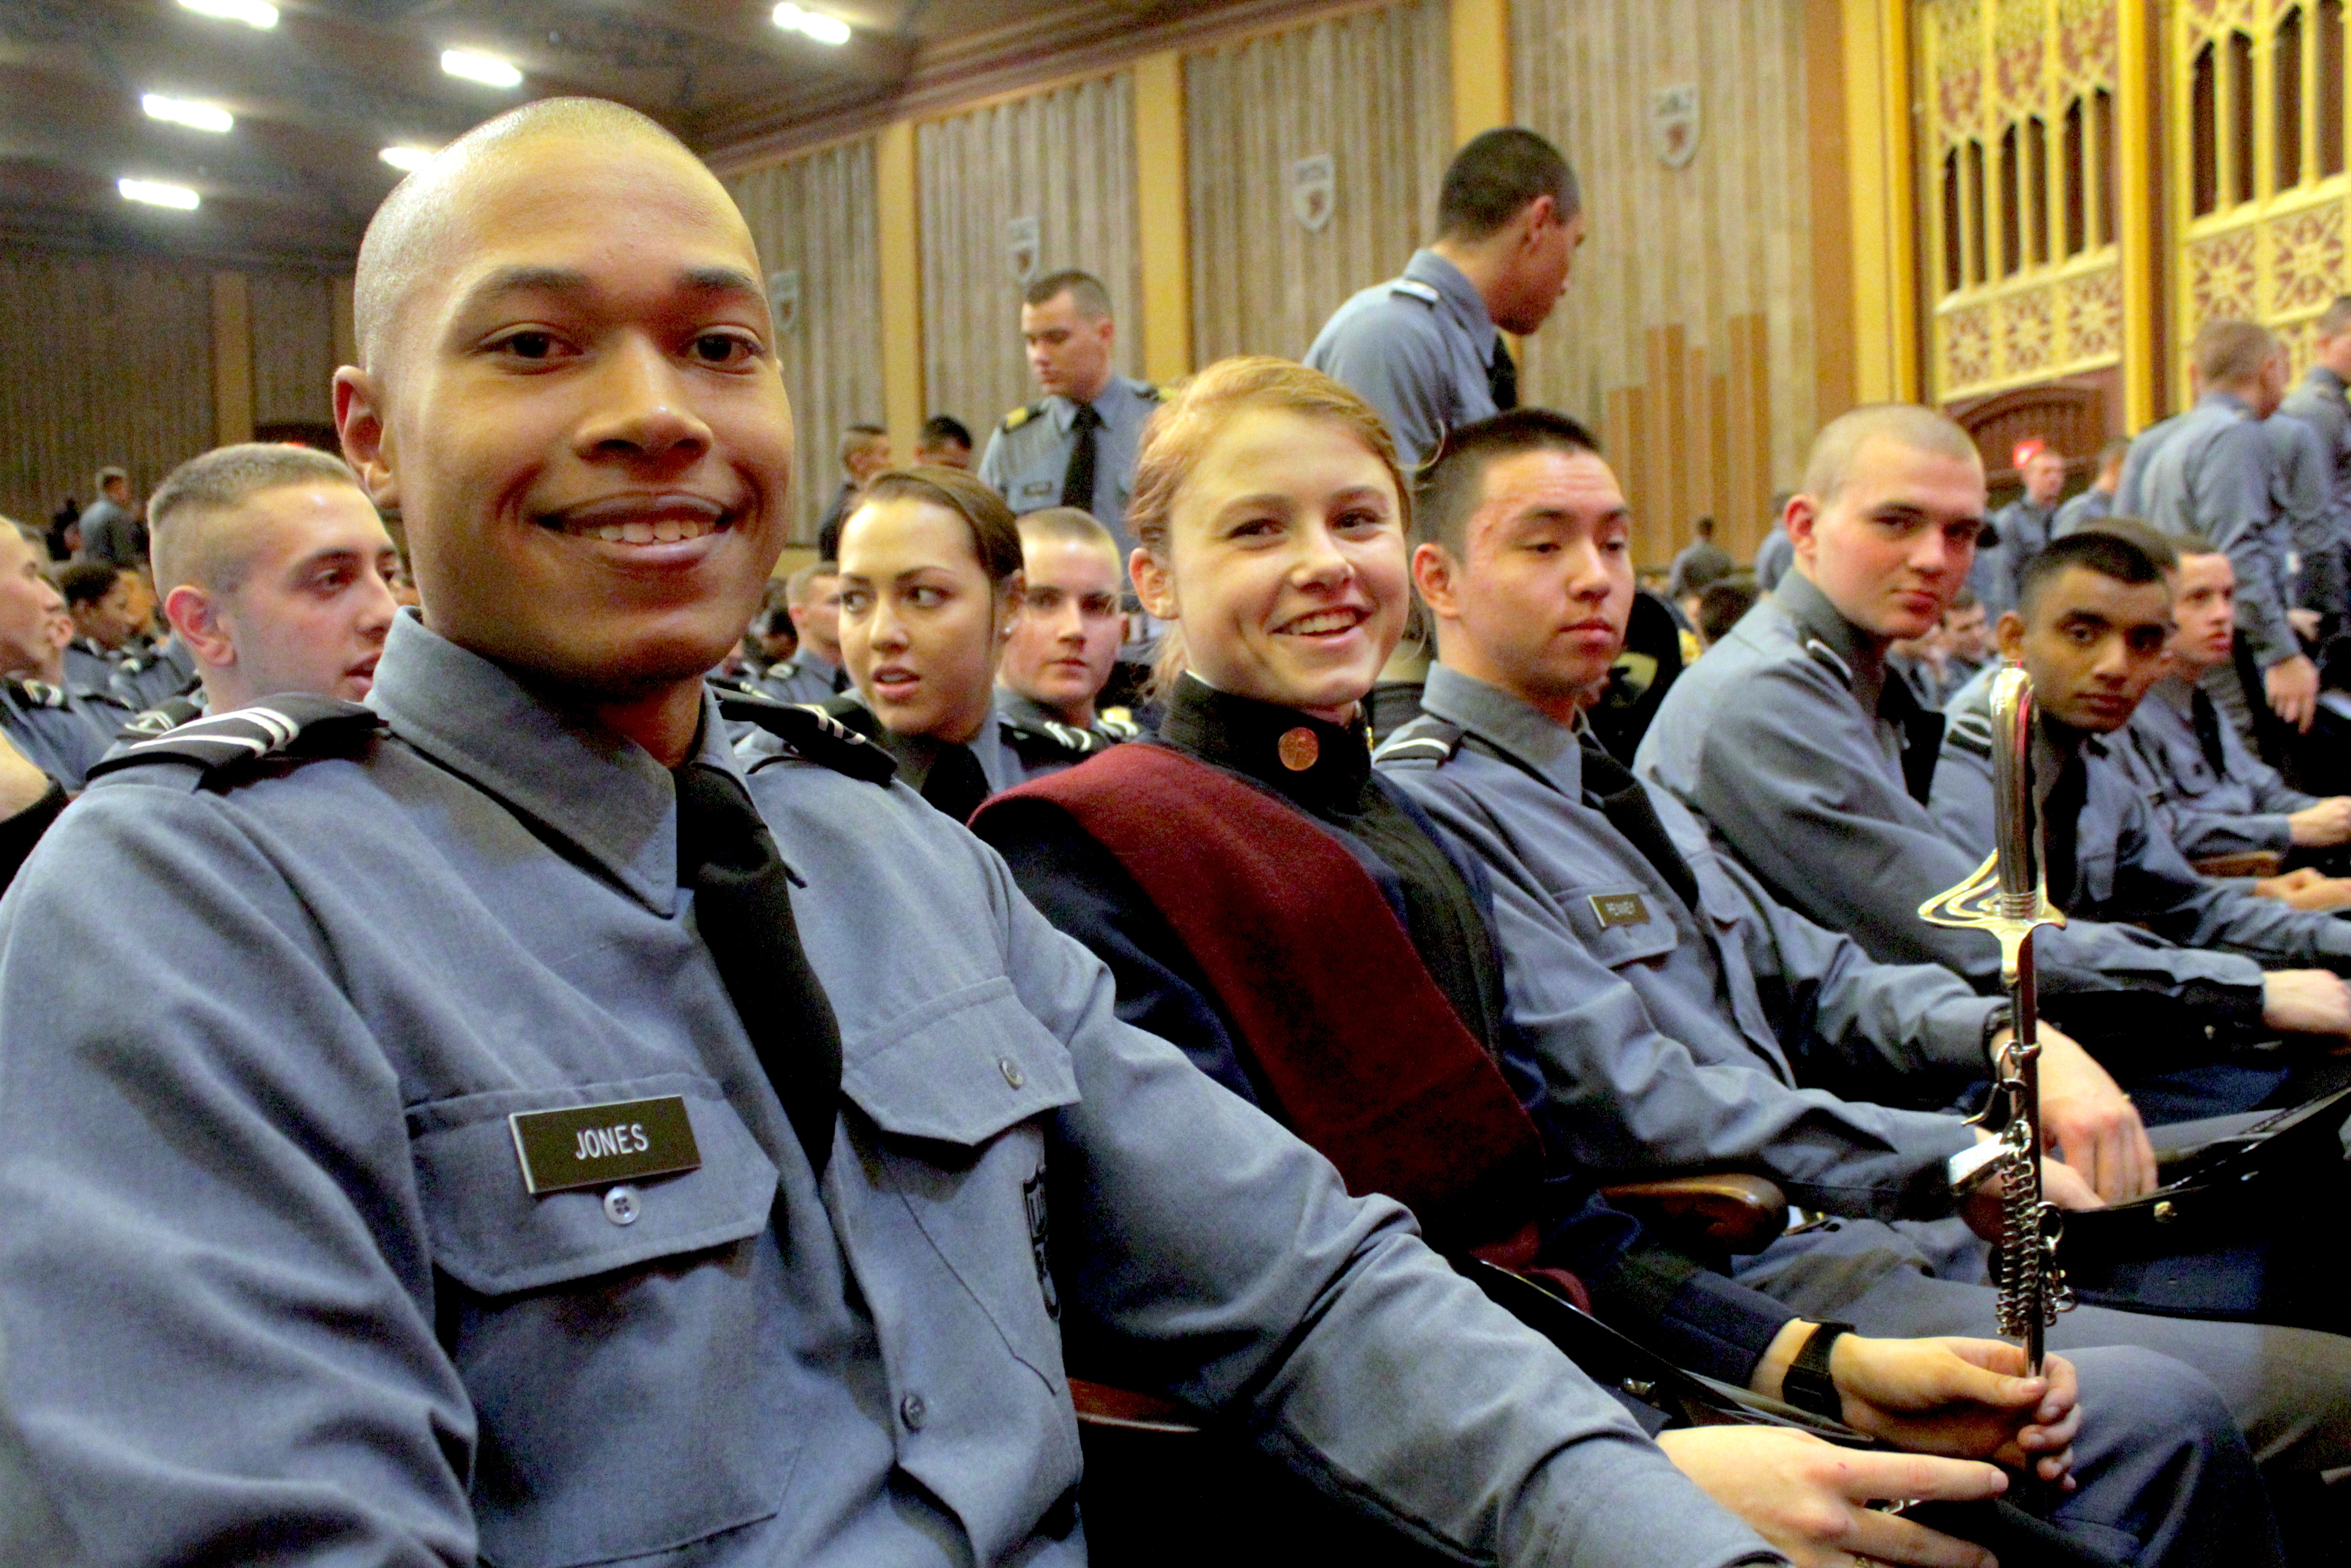 First-year cadets proudly show off their upperclassman rank and attire during Corps Lab on Shadow Day in Burruss Hall.